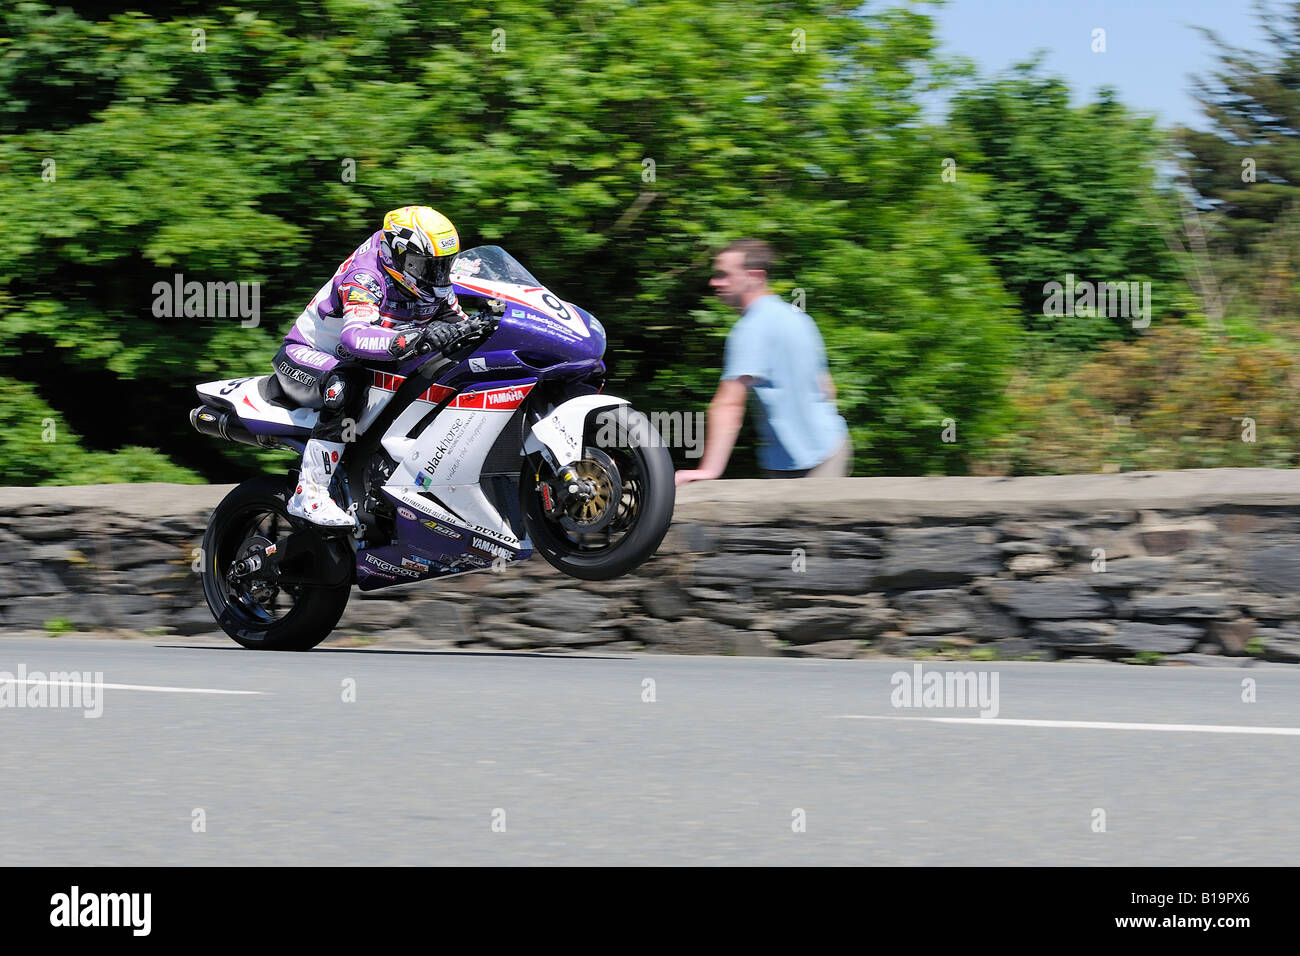 Ian Lougher lands after taking of at Sulby Bridge Superbike Race TT08. Spectator watching from behind a wall Stock Photo